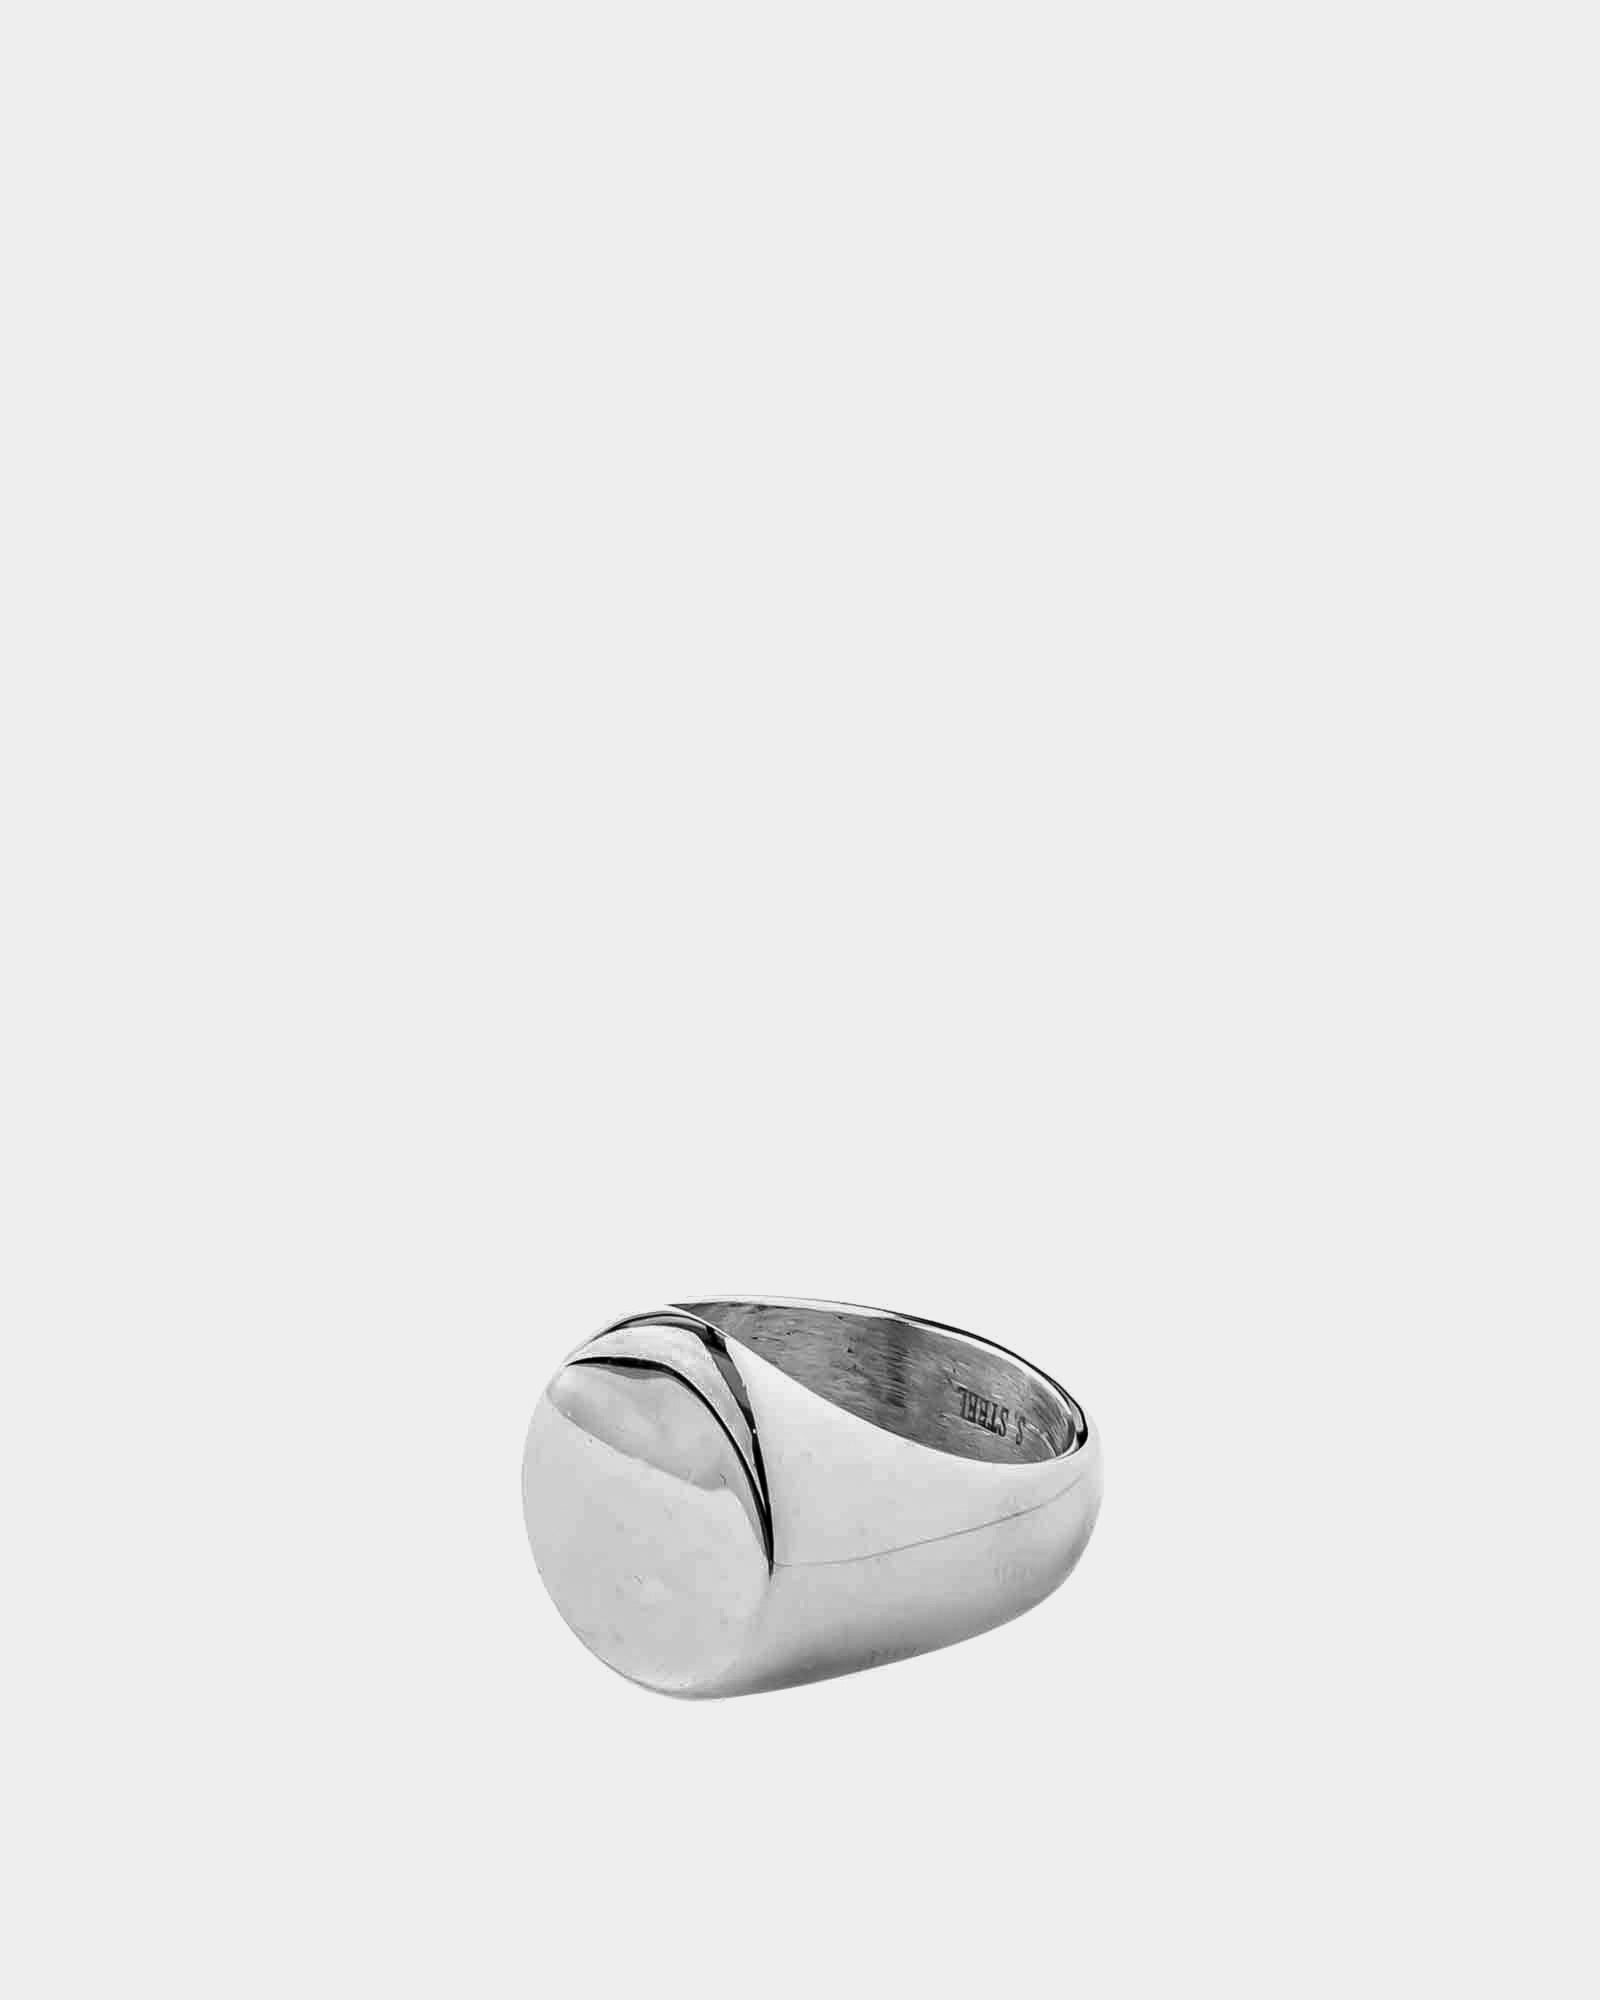 Lessmore - Stainless Steel Ring 'Lessmore' - Signet Ring - Online Unissex Jewelry - Dicci